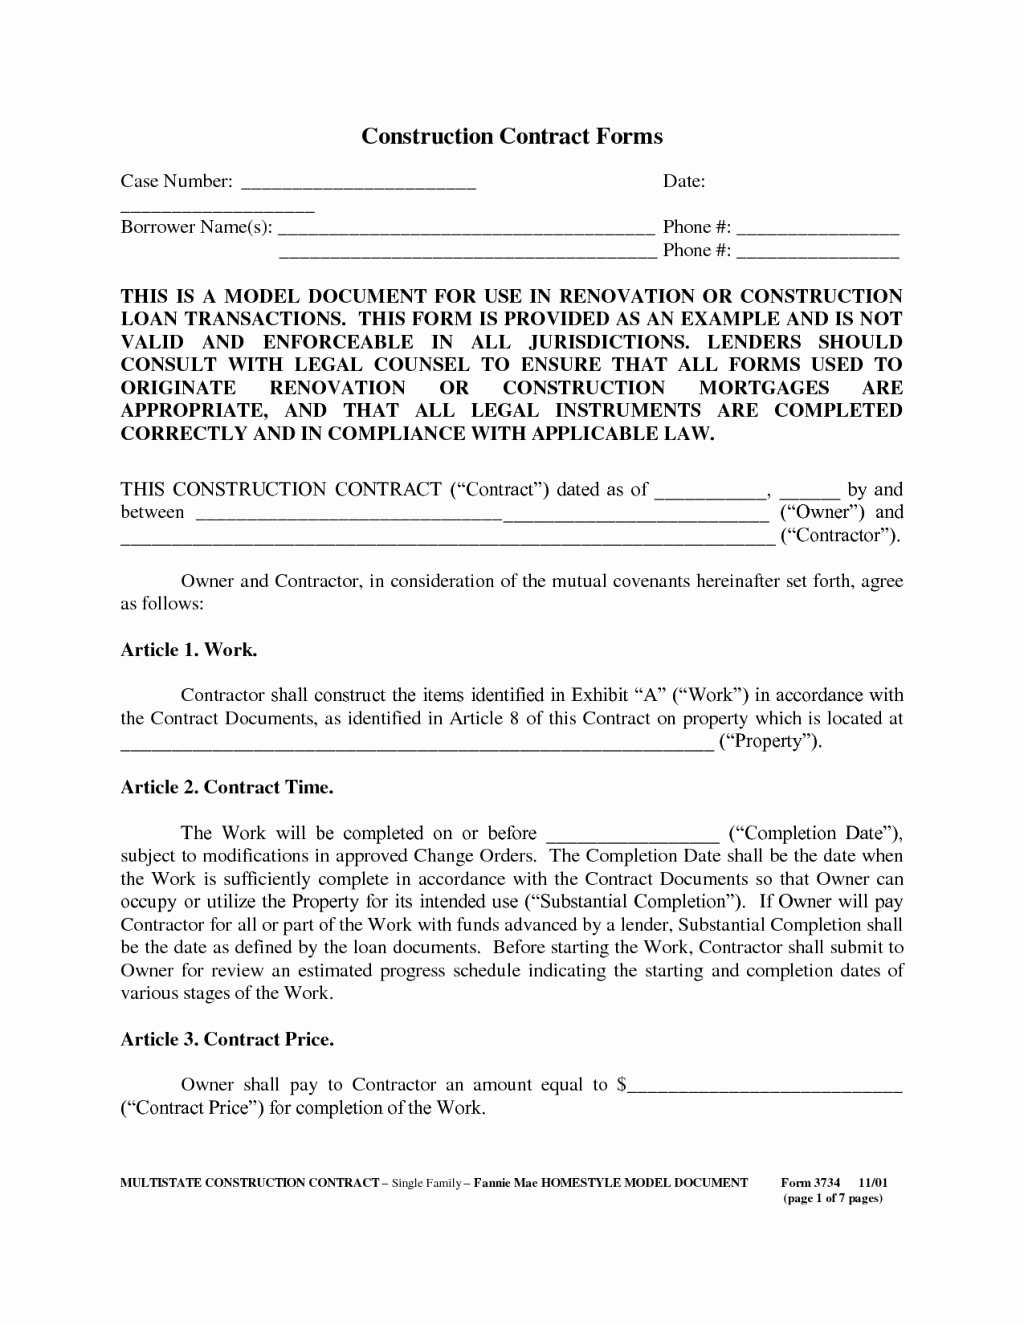 Contract Agreement forms and Sample Business Contract